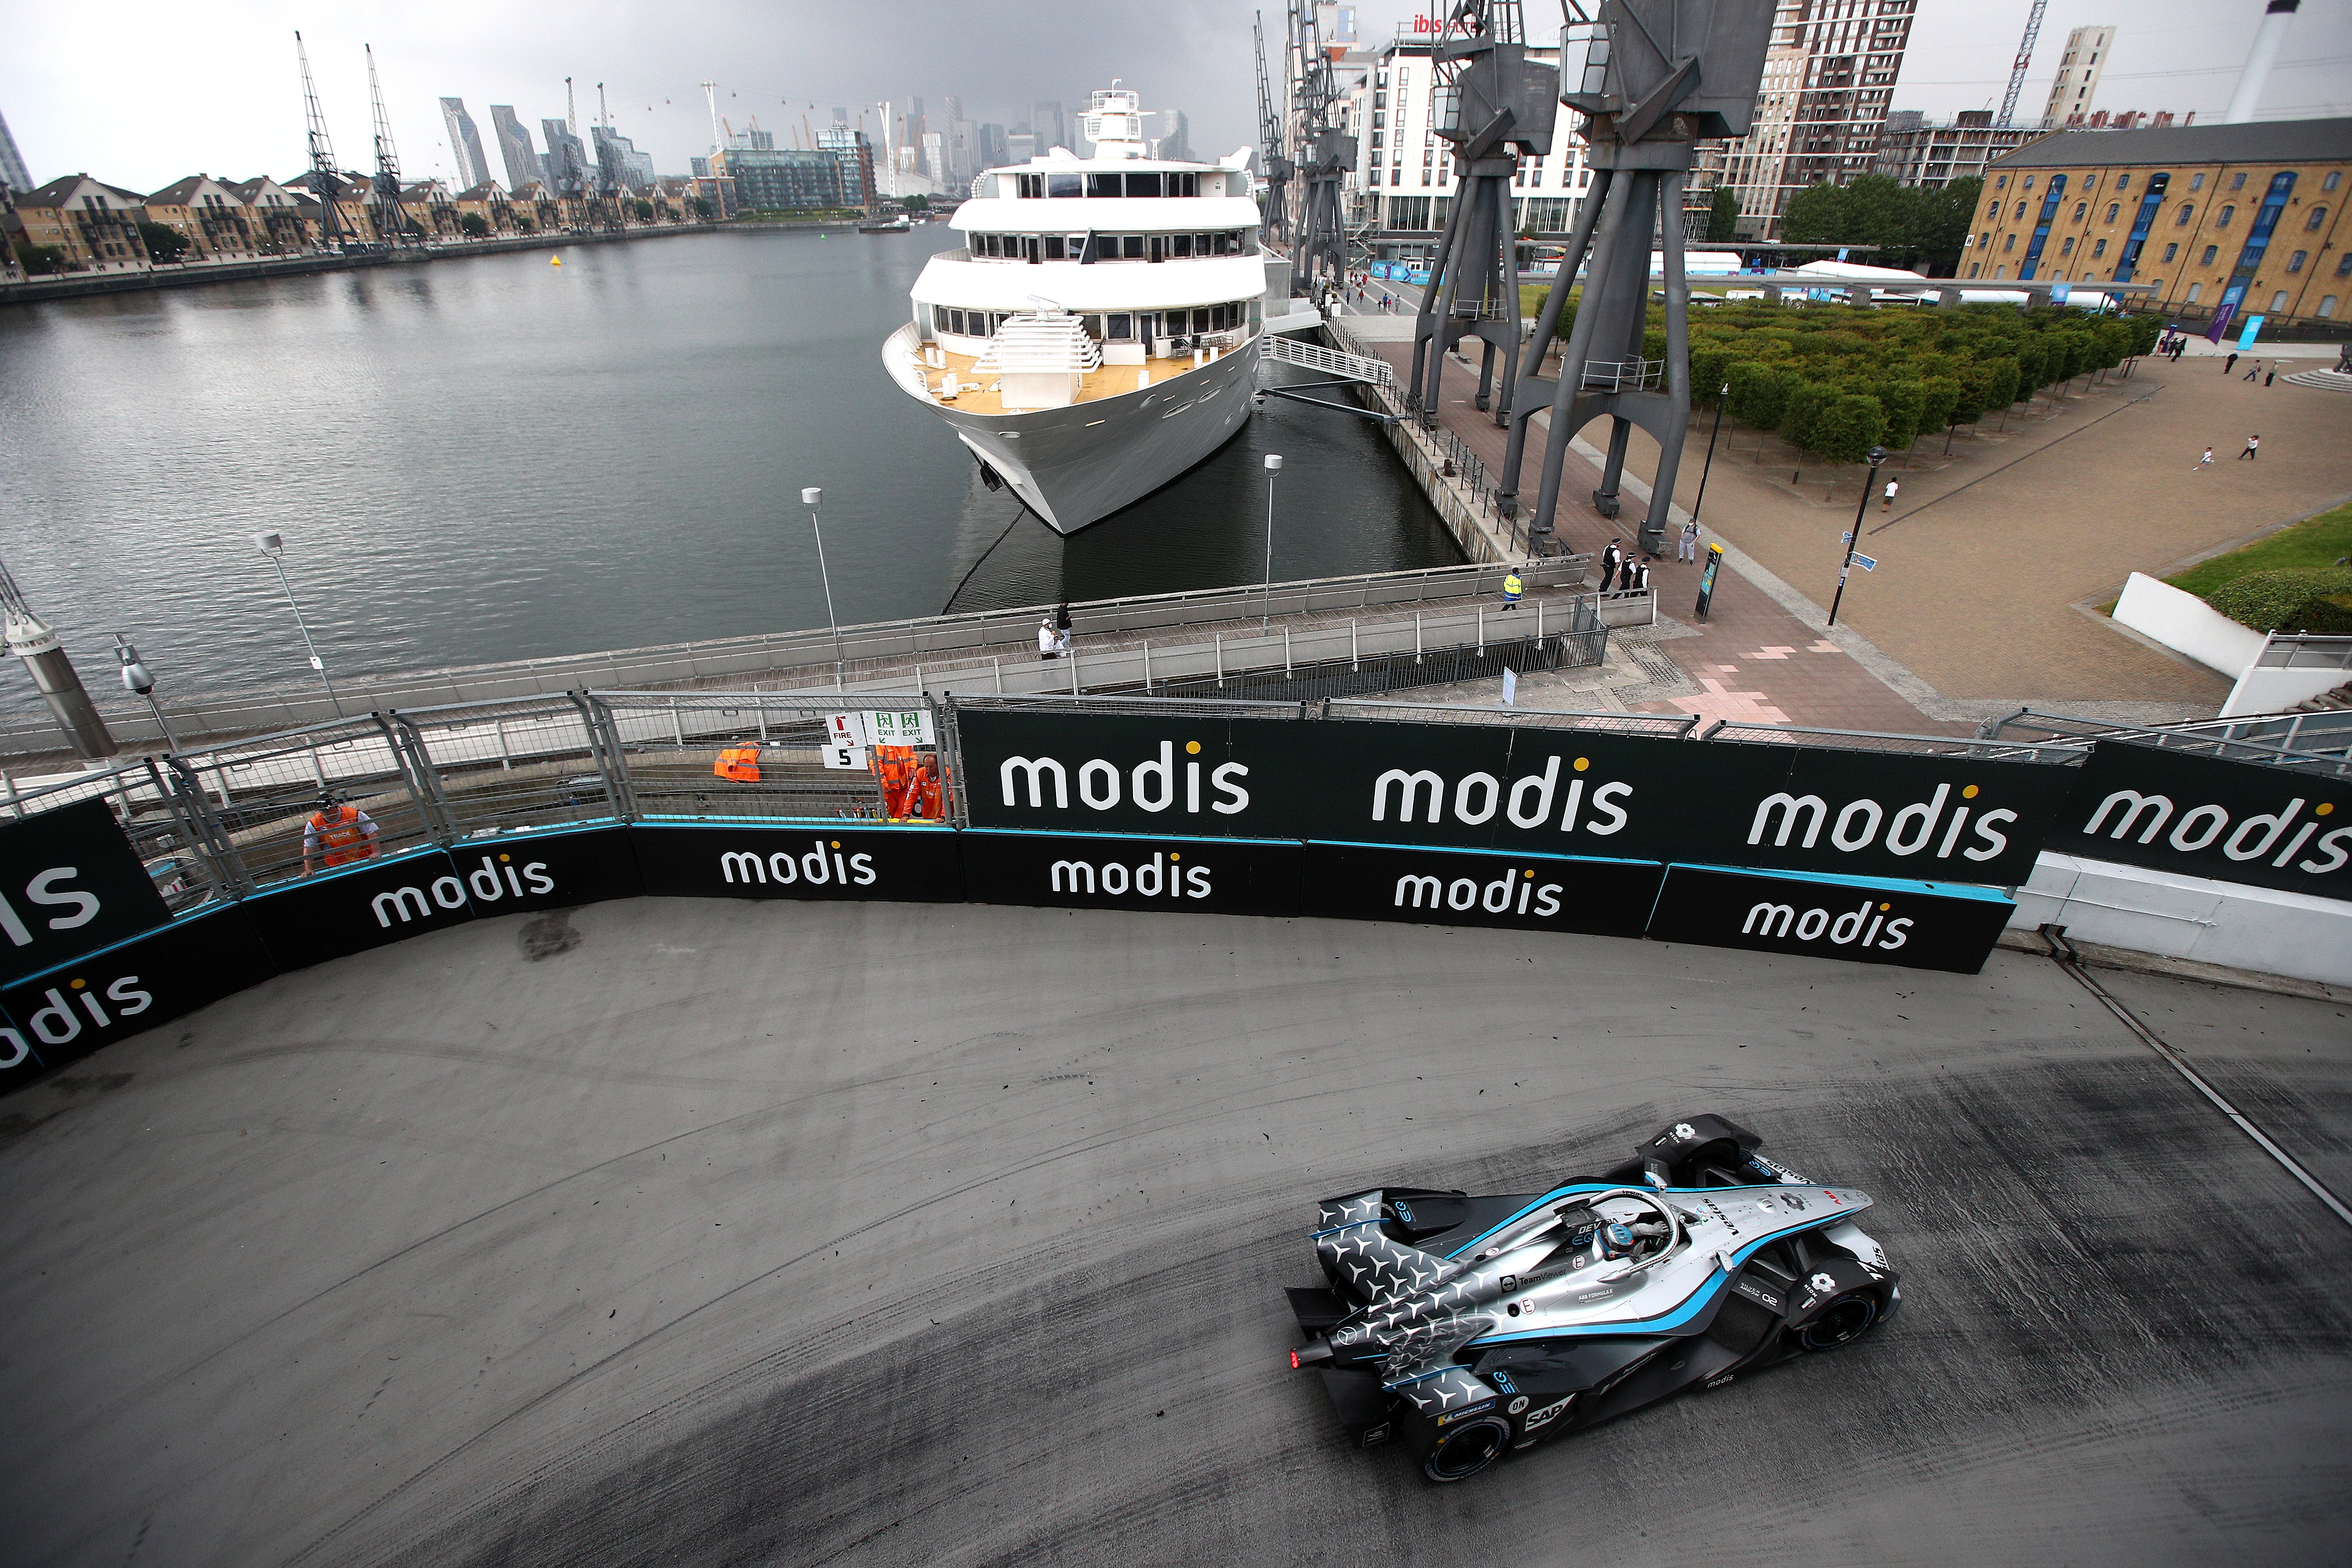 De Vries won Formula E last season and was victorious on the docks in London